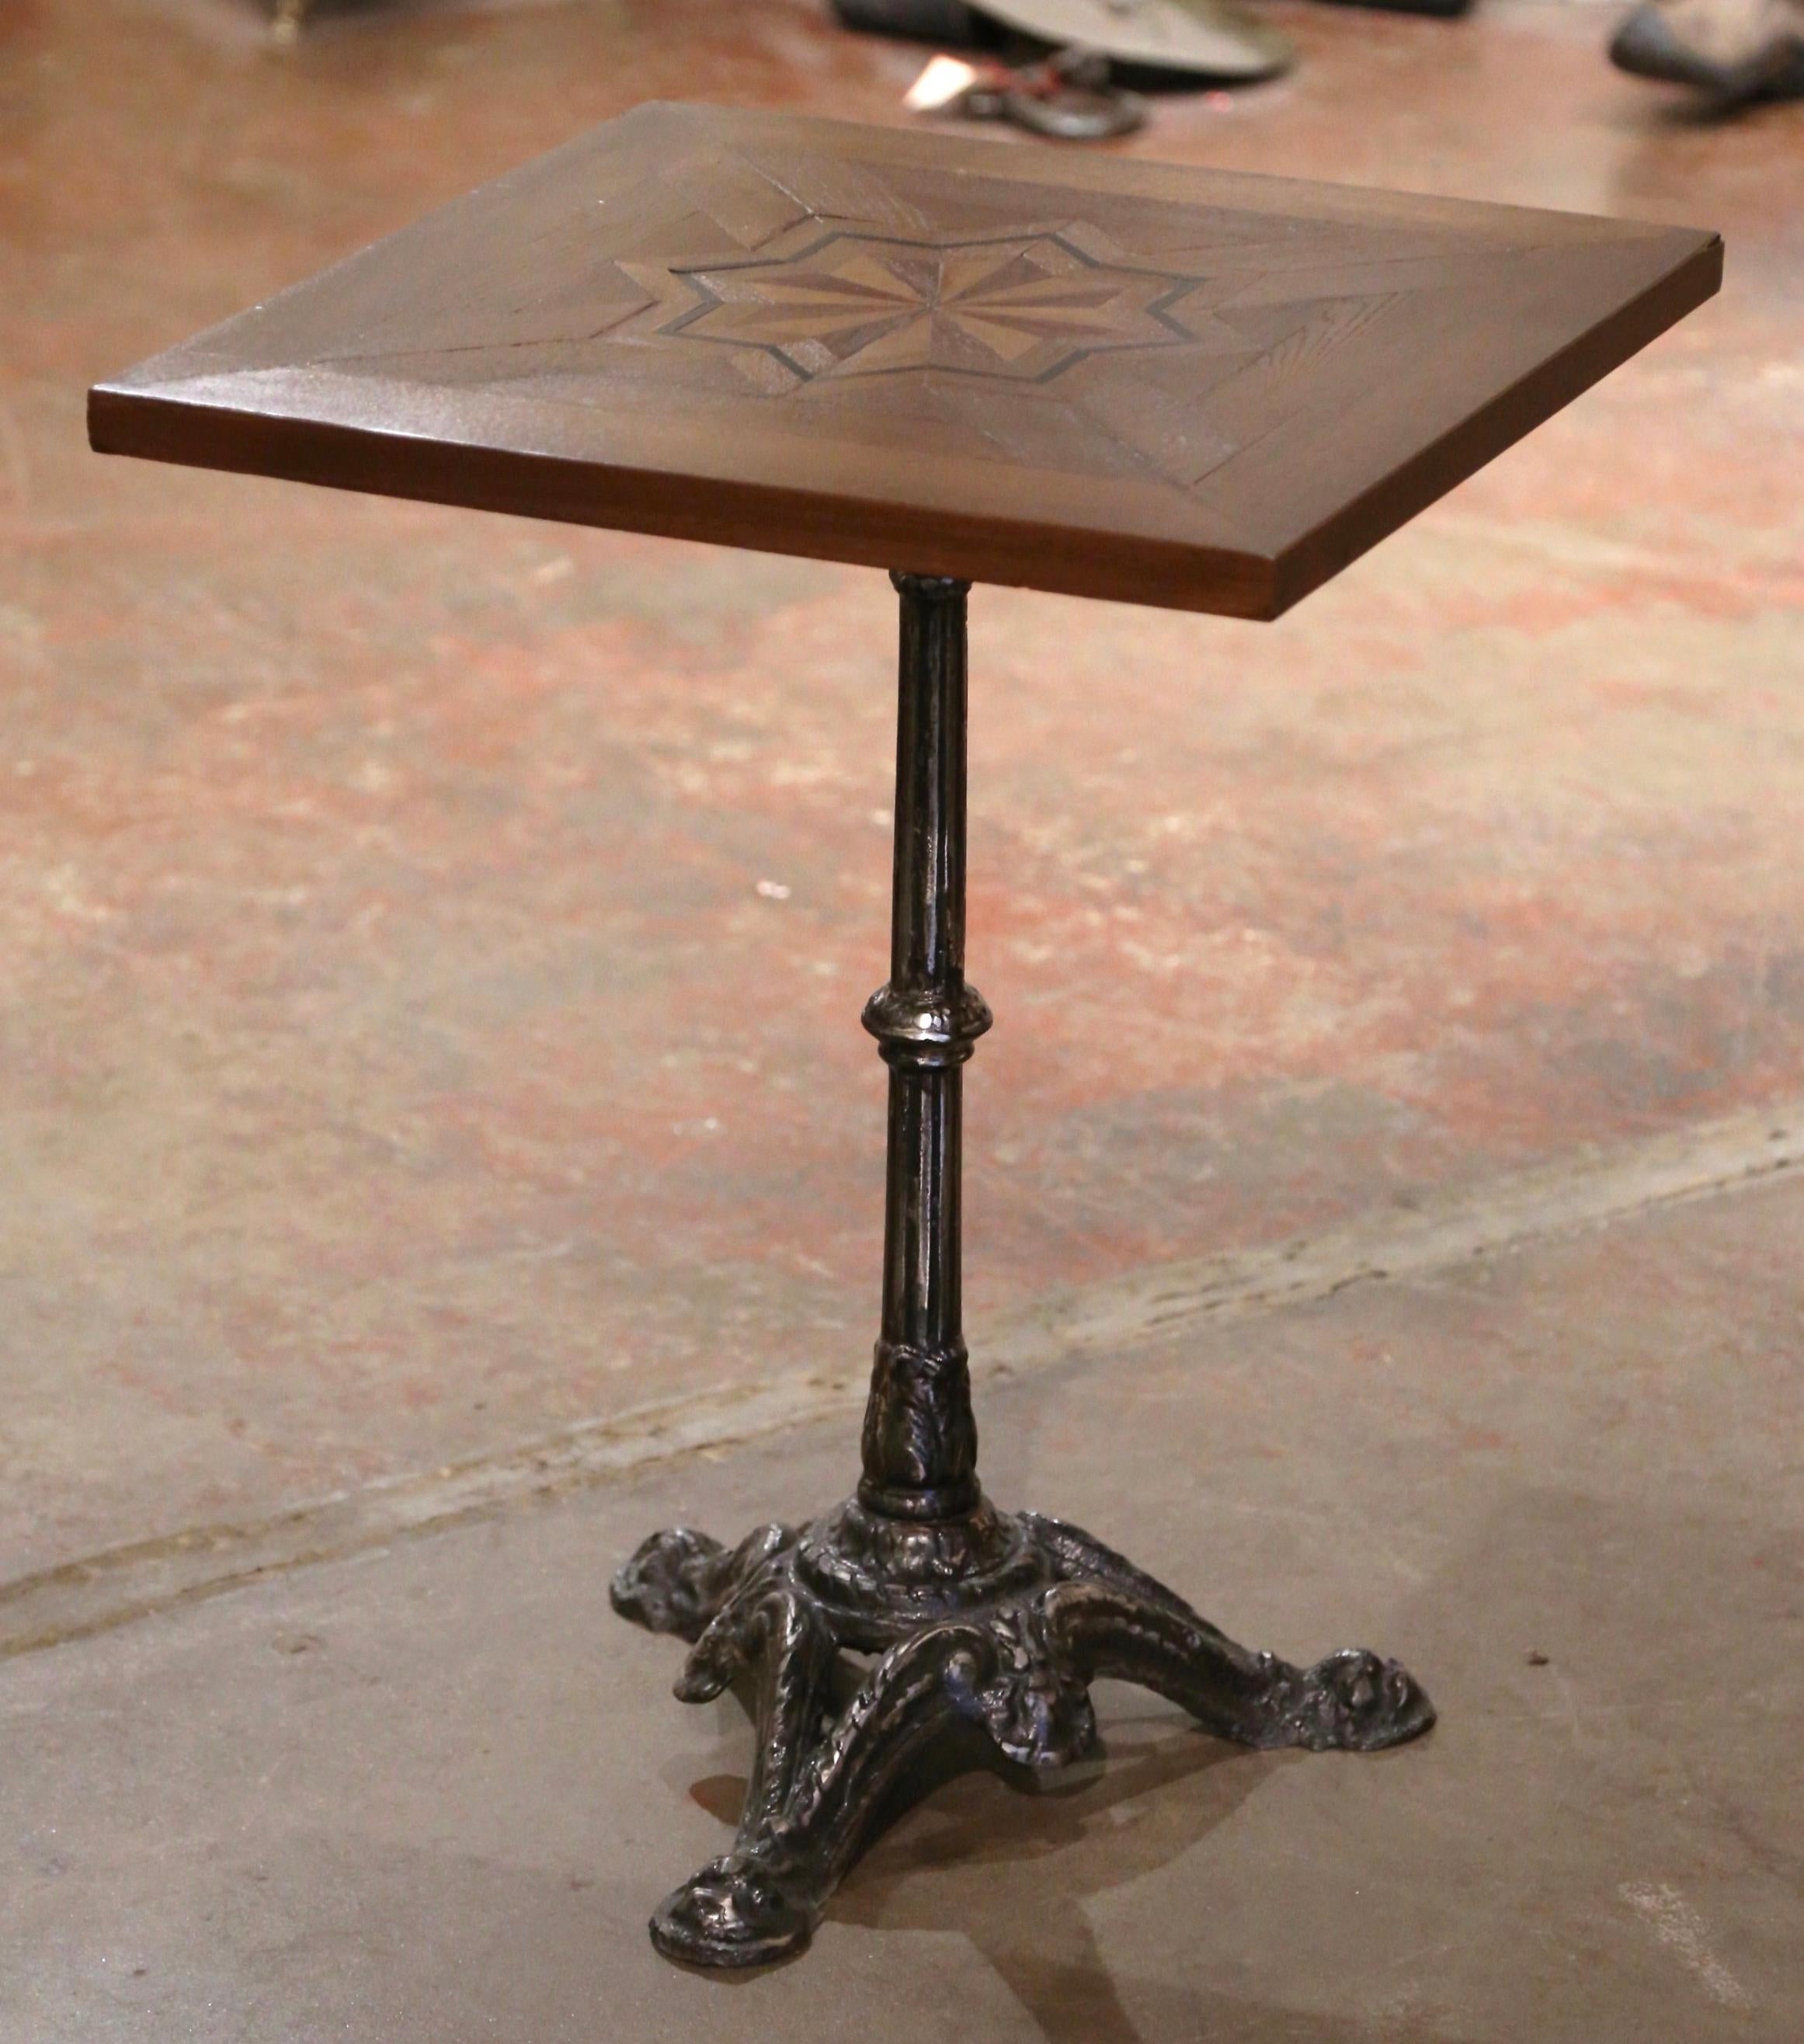 This exquisite, antique gueridon table was crafted in Paris, France, circa 1870. The intricate iron base sits on three paw feet embellished with acanthus leaf motifs over a carved and fluted stem. The classic bistrot base is dressed with a square,